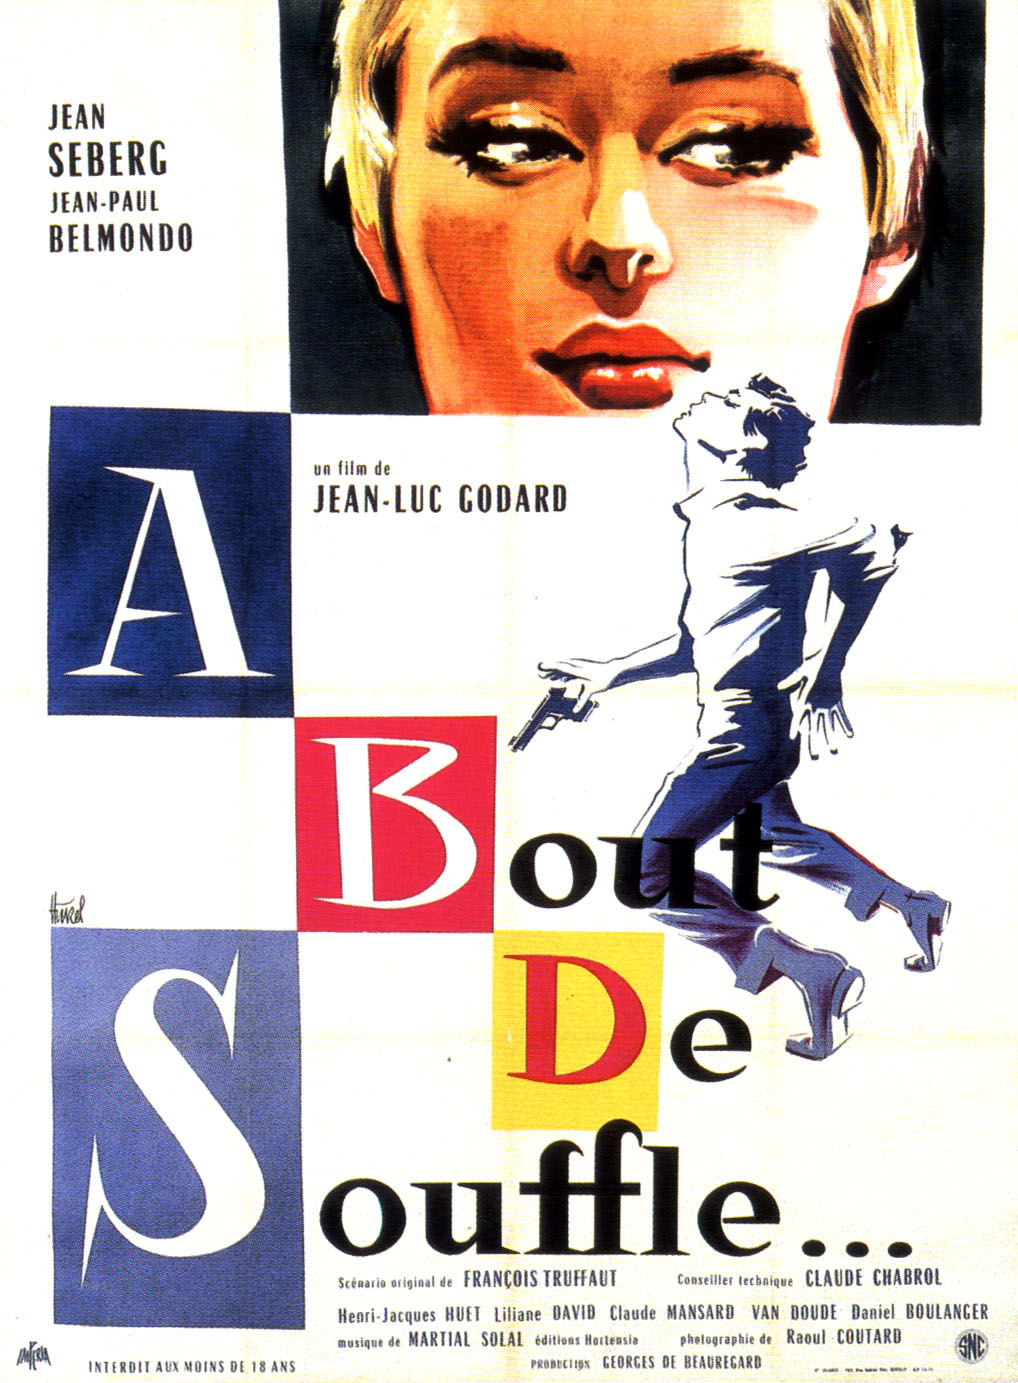 It is a remake of the 1960 French film directed by Jean-Luc Godard, A bout de 

souffle. The original film is about an American girl and a French criminal in 

Paris. The remake is about a French girl and an American criminal in Los 

Angeles.